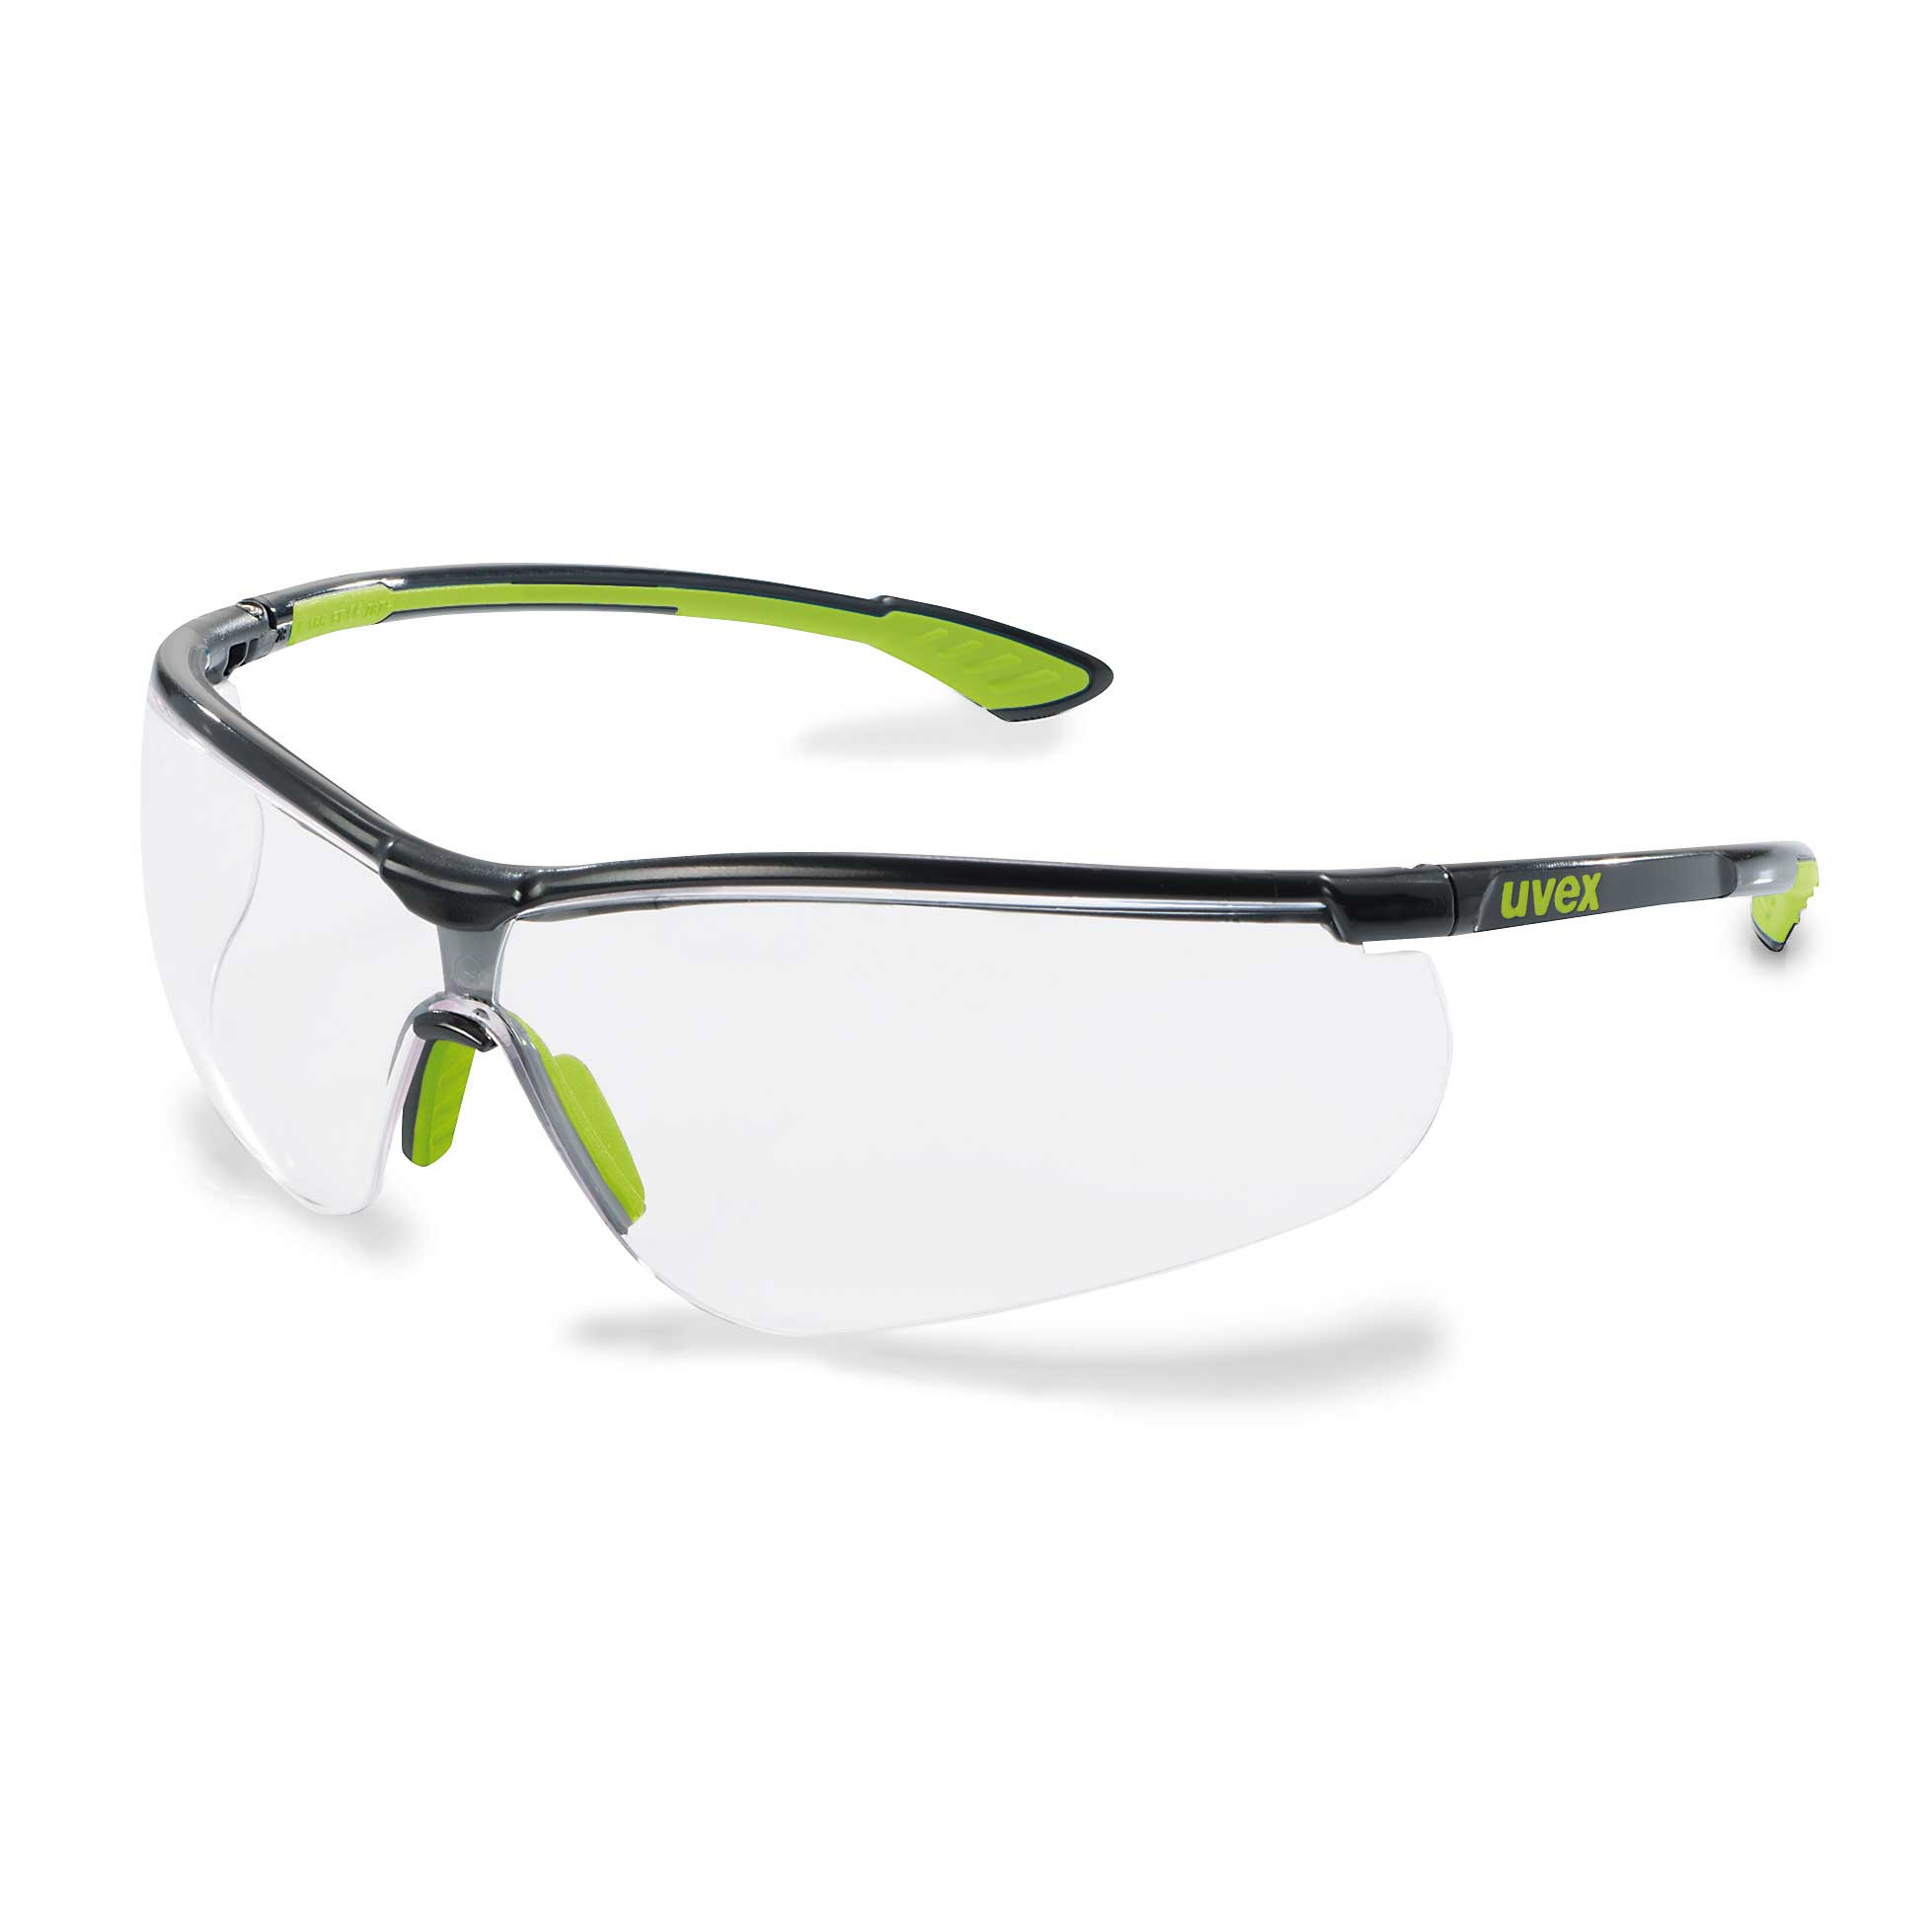 UVEX Sportstyle Eye Protection Spectacles